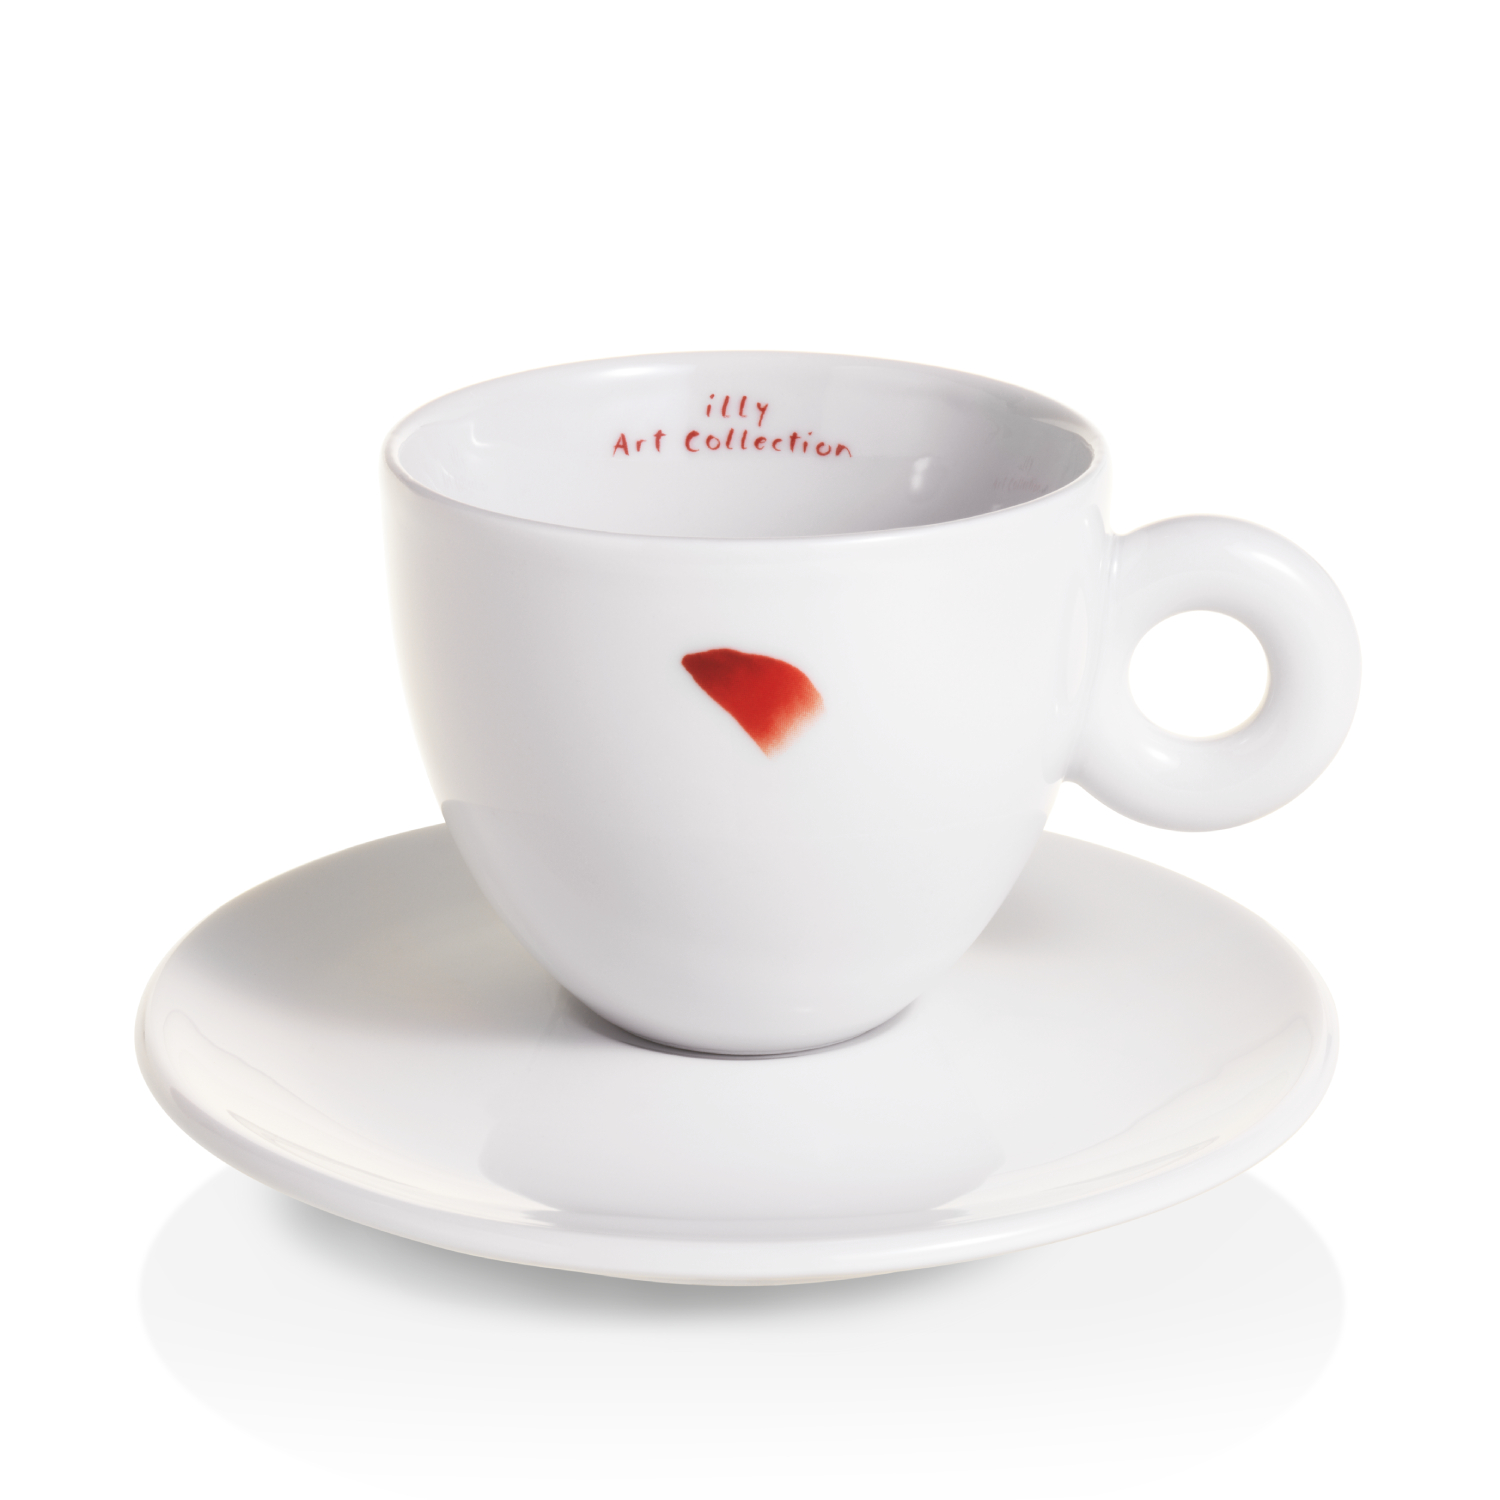 illy Art Collection LEE UFAN Σετ Δώρου 2 Cappuccino Cups, Φλιτζάνια , 02-02-2018